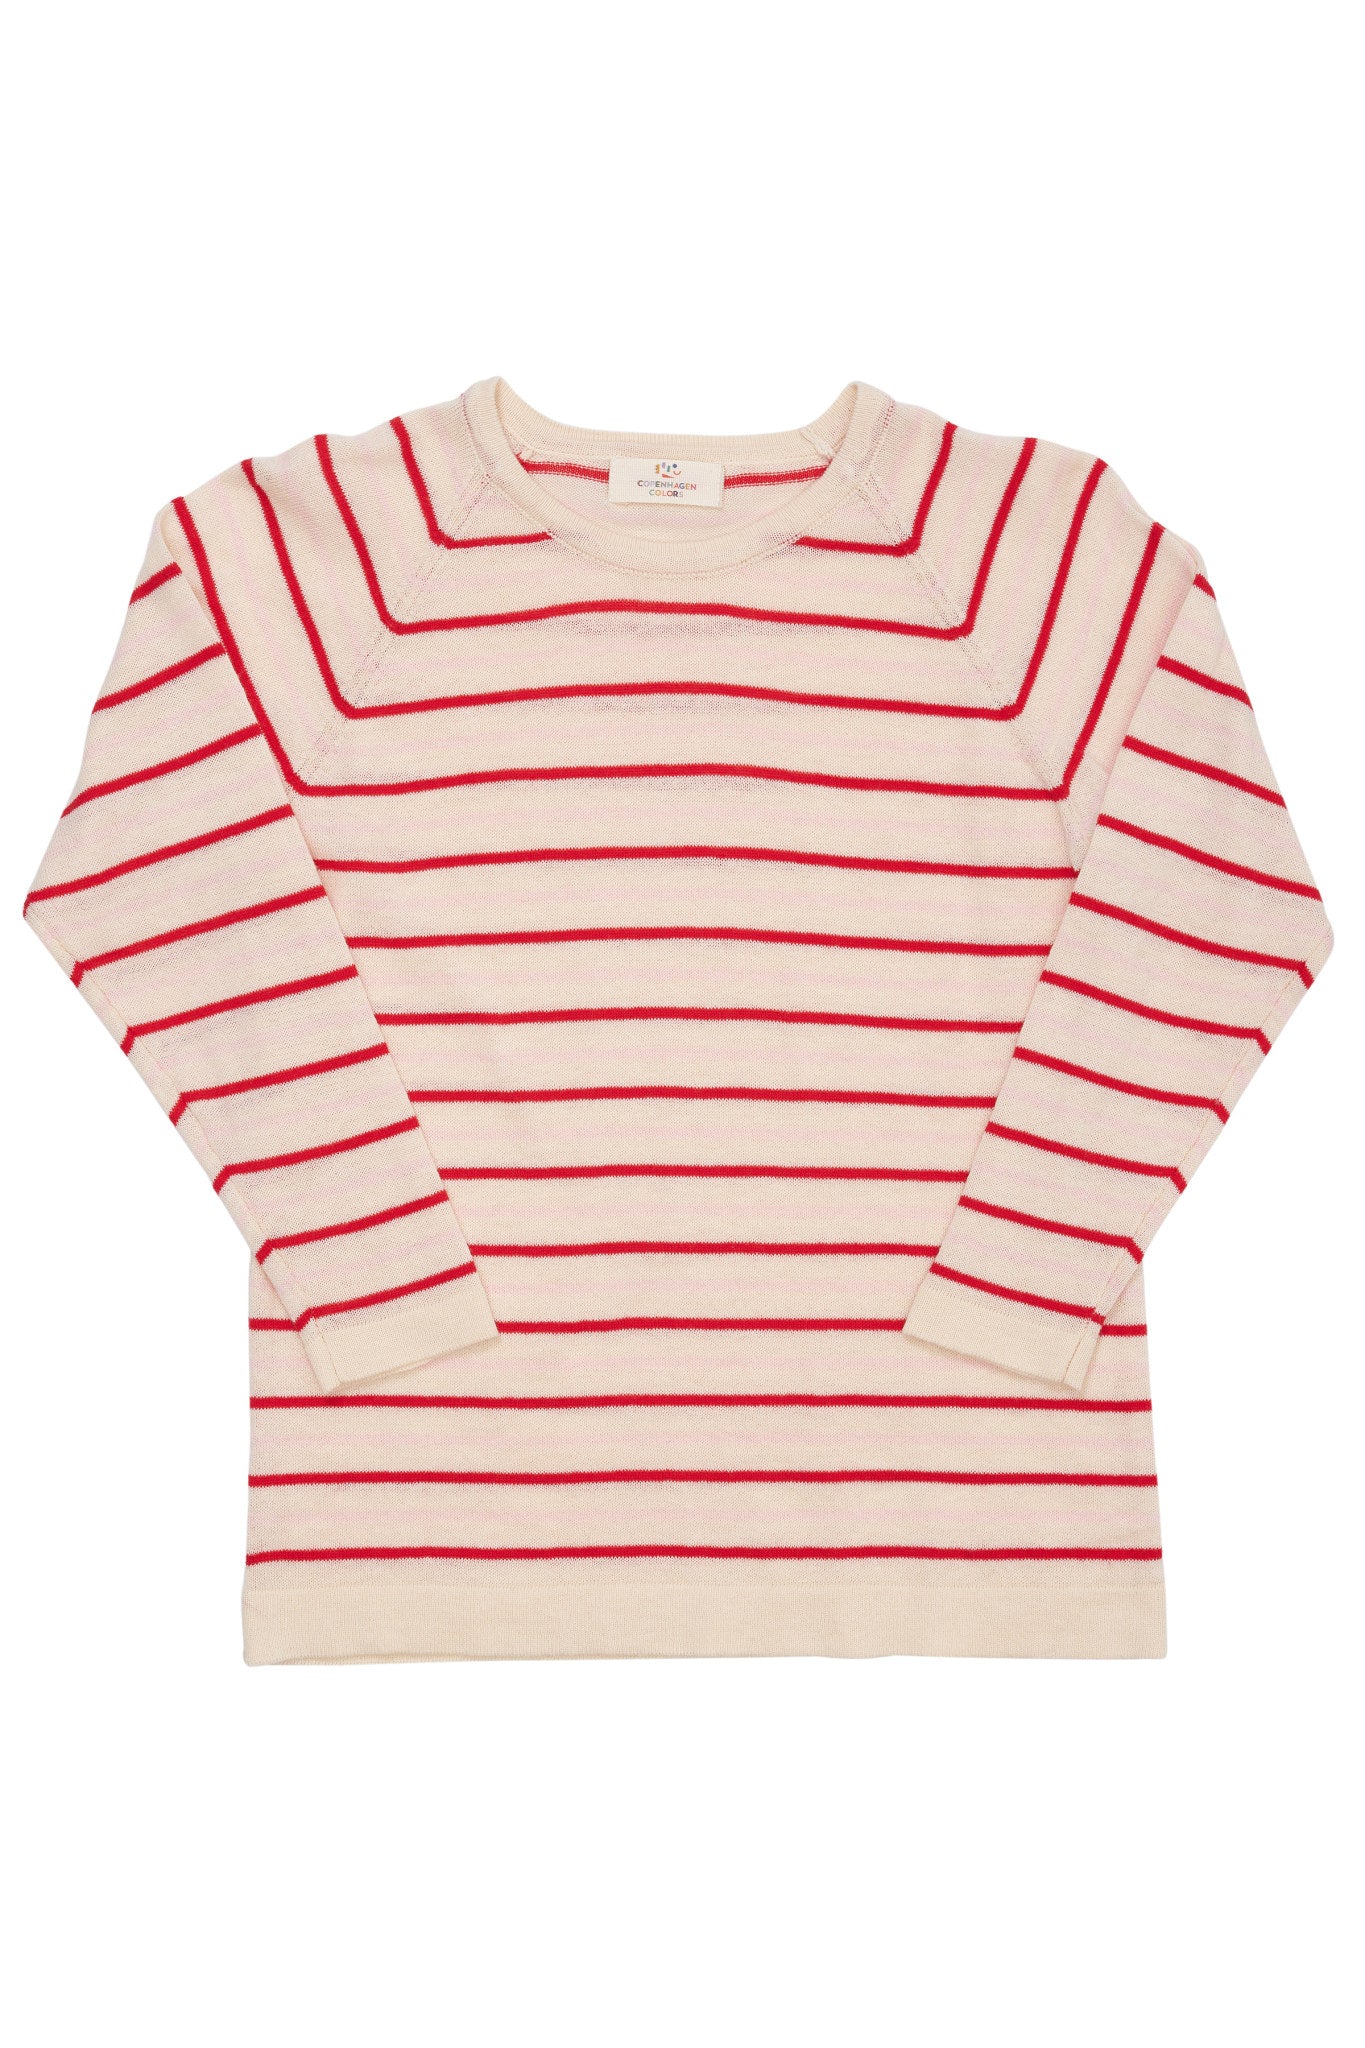 LT. KNITTED T-SHIRT LS - CREAM/DUSTY ROSE/RED COMB.